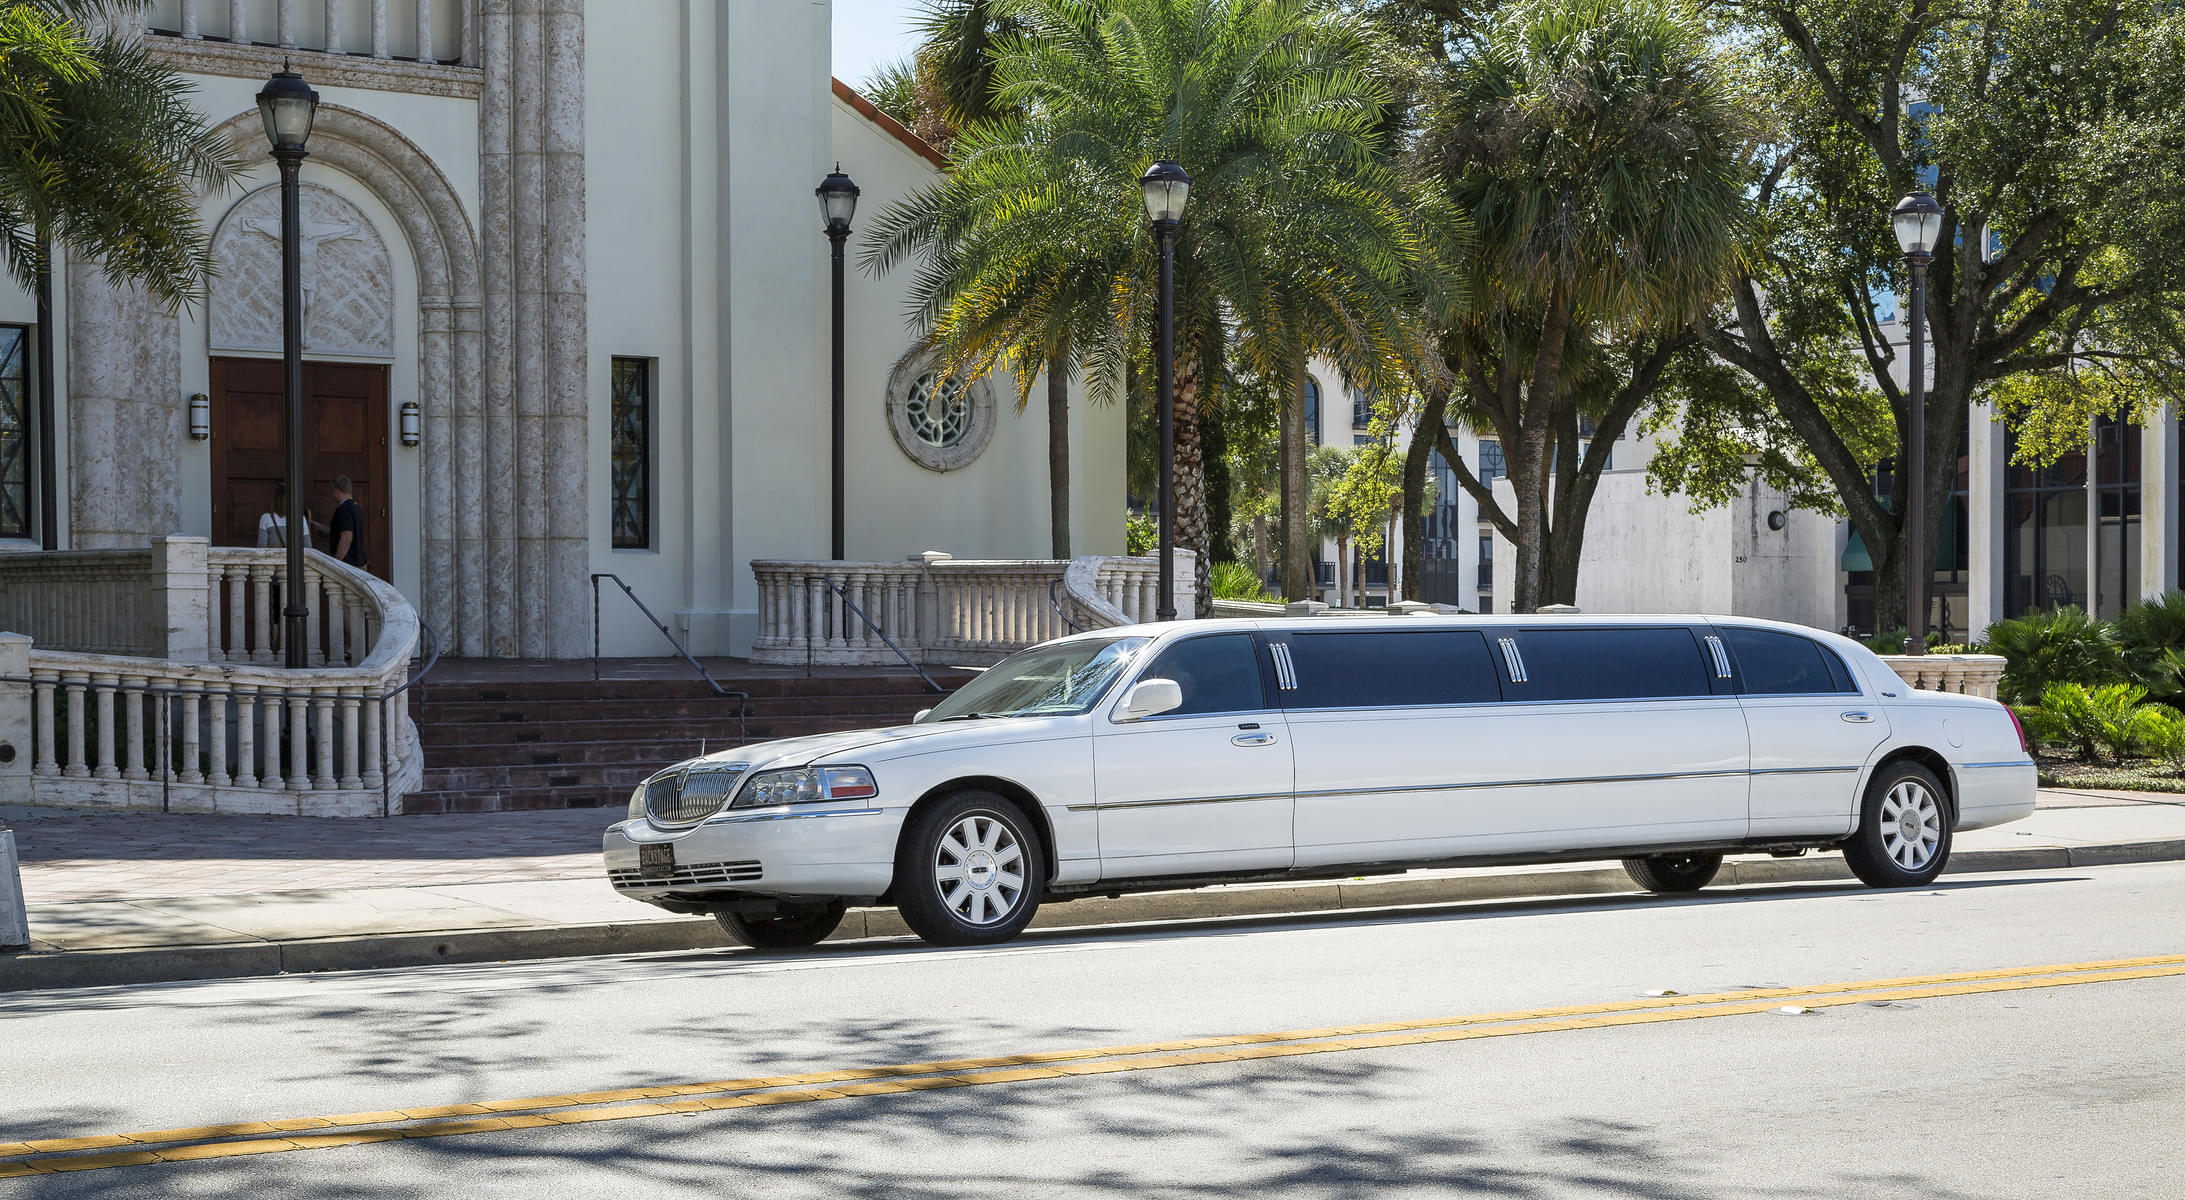 Enjoy yourself as you cruise around in a Lincoln limo